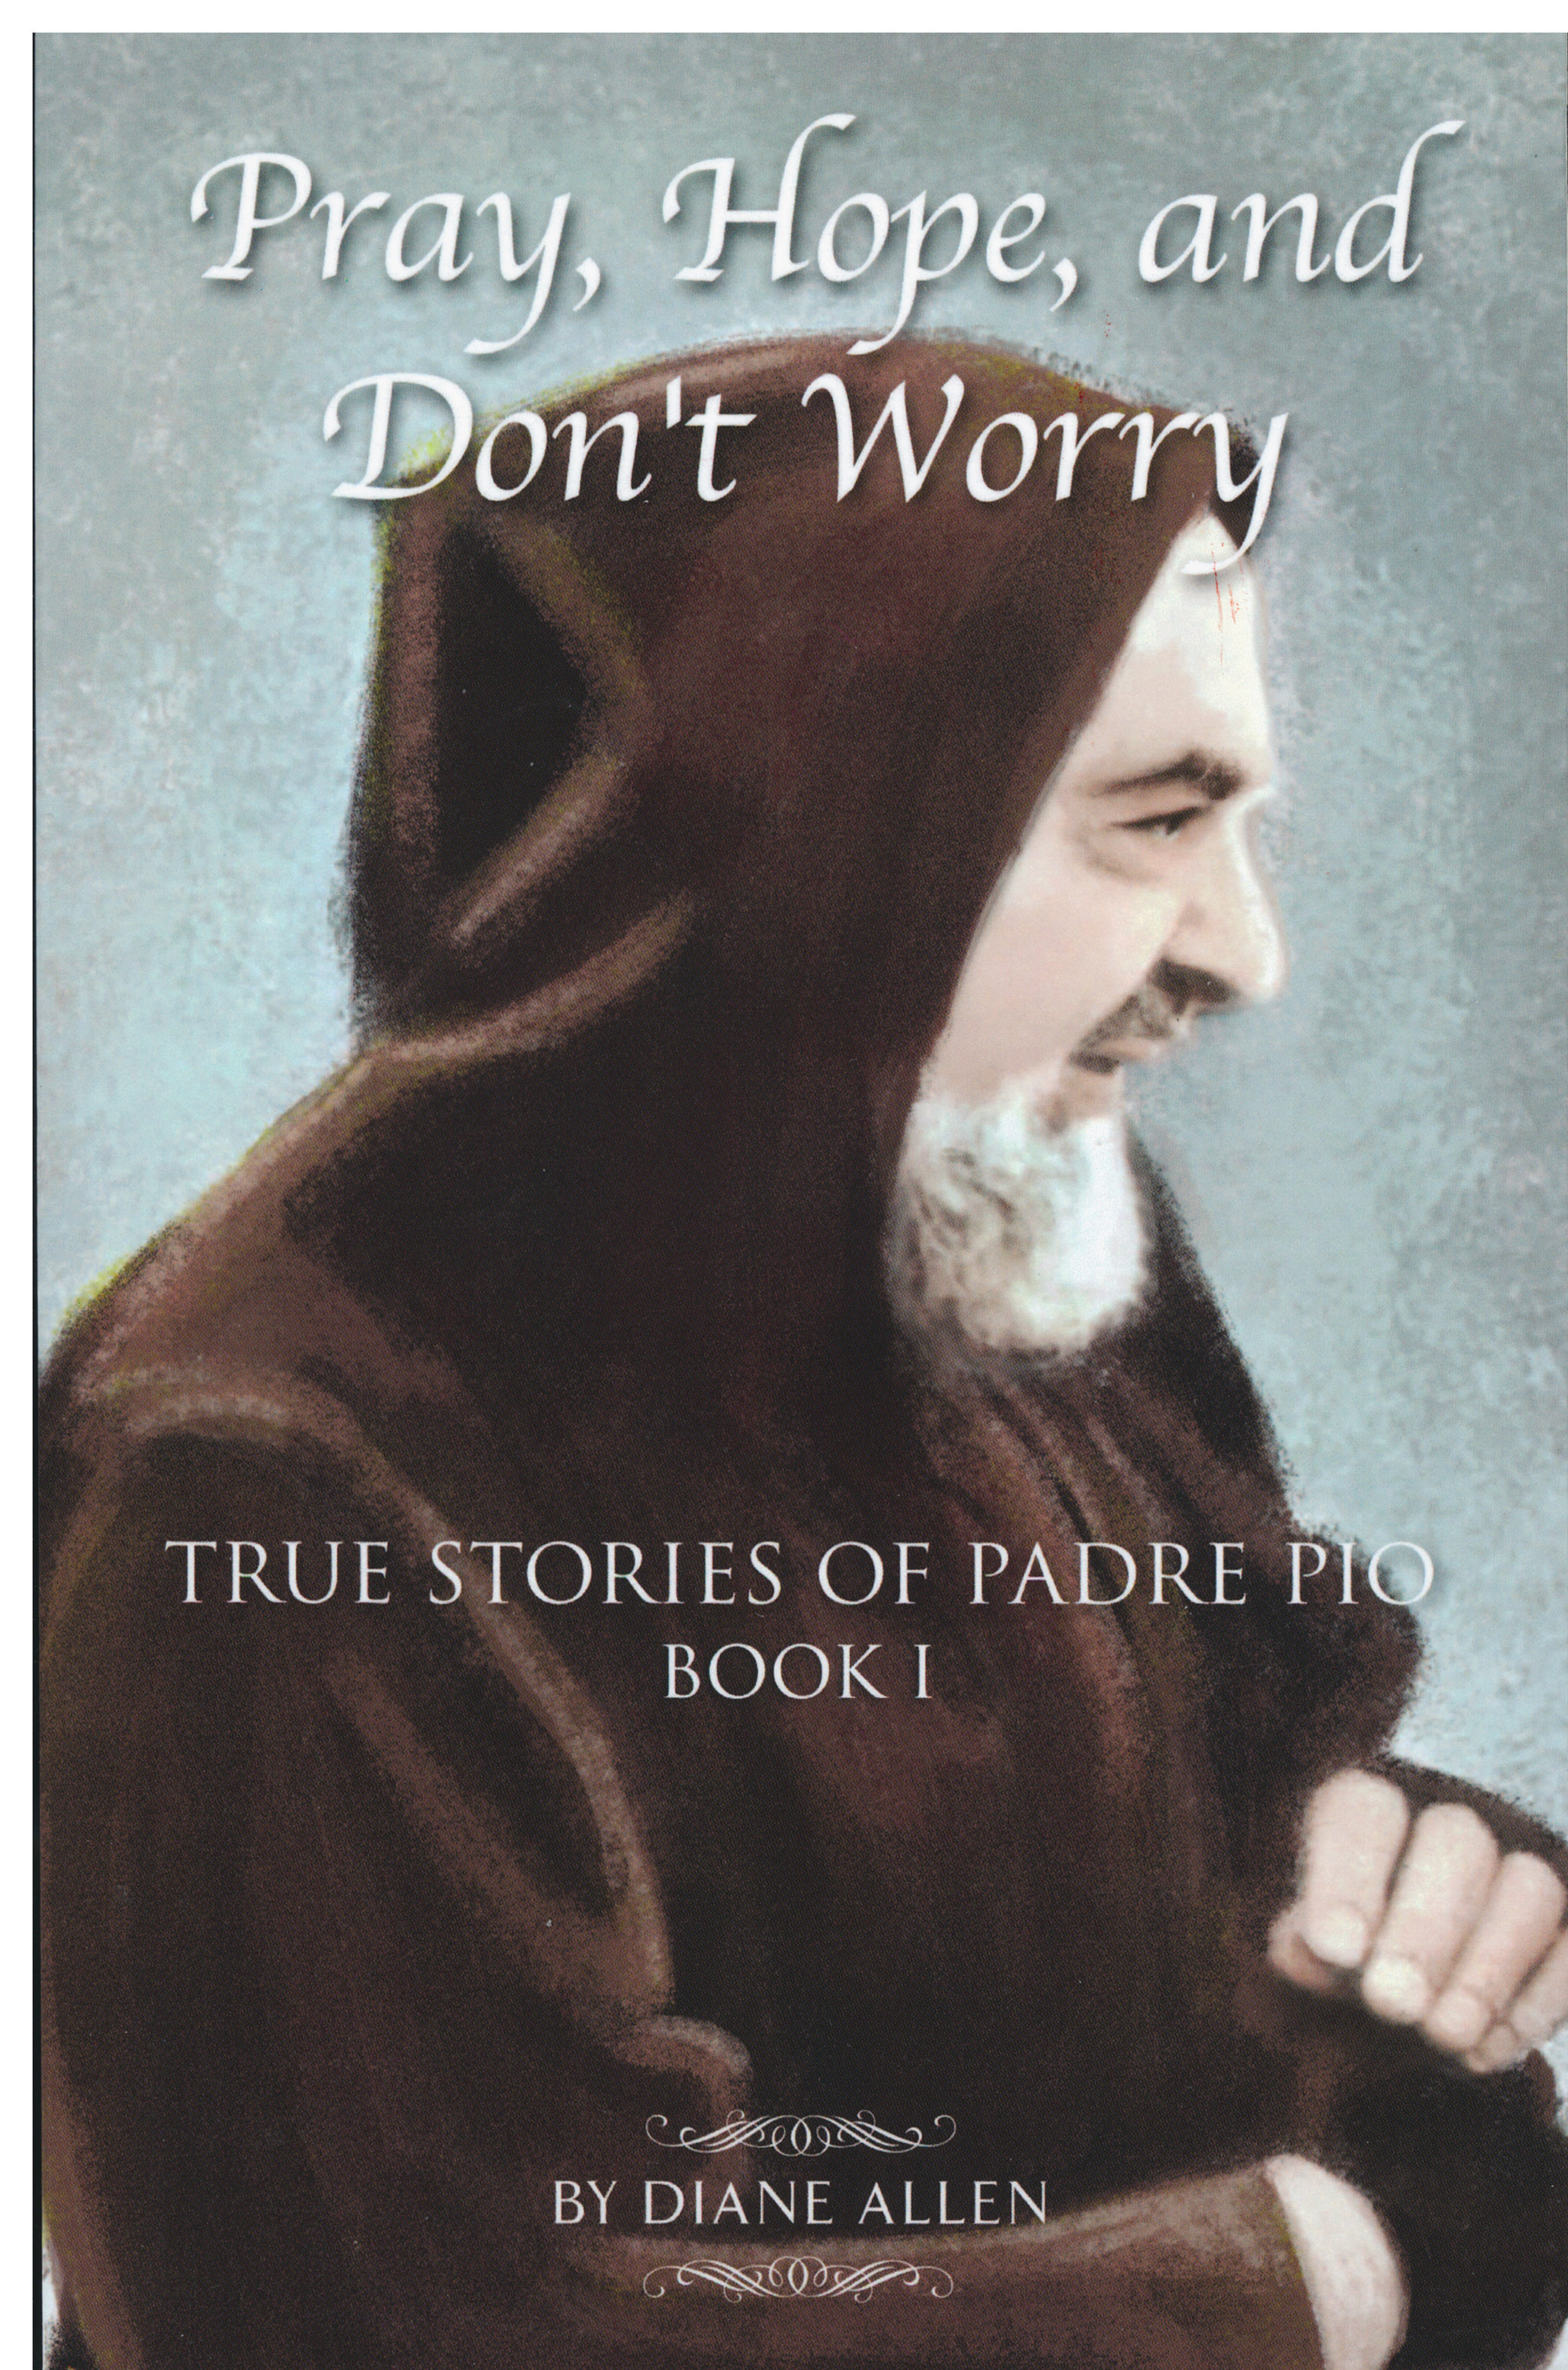 Pray Hope and Don't Worry: True Stories of Padre Pio by Diane Allen 108-9780983710516